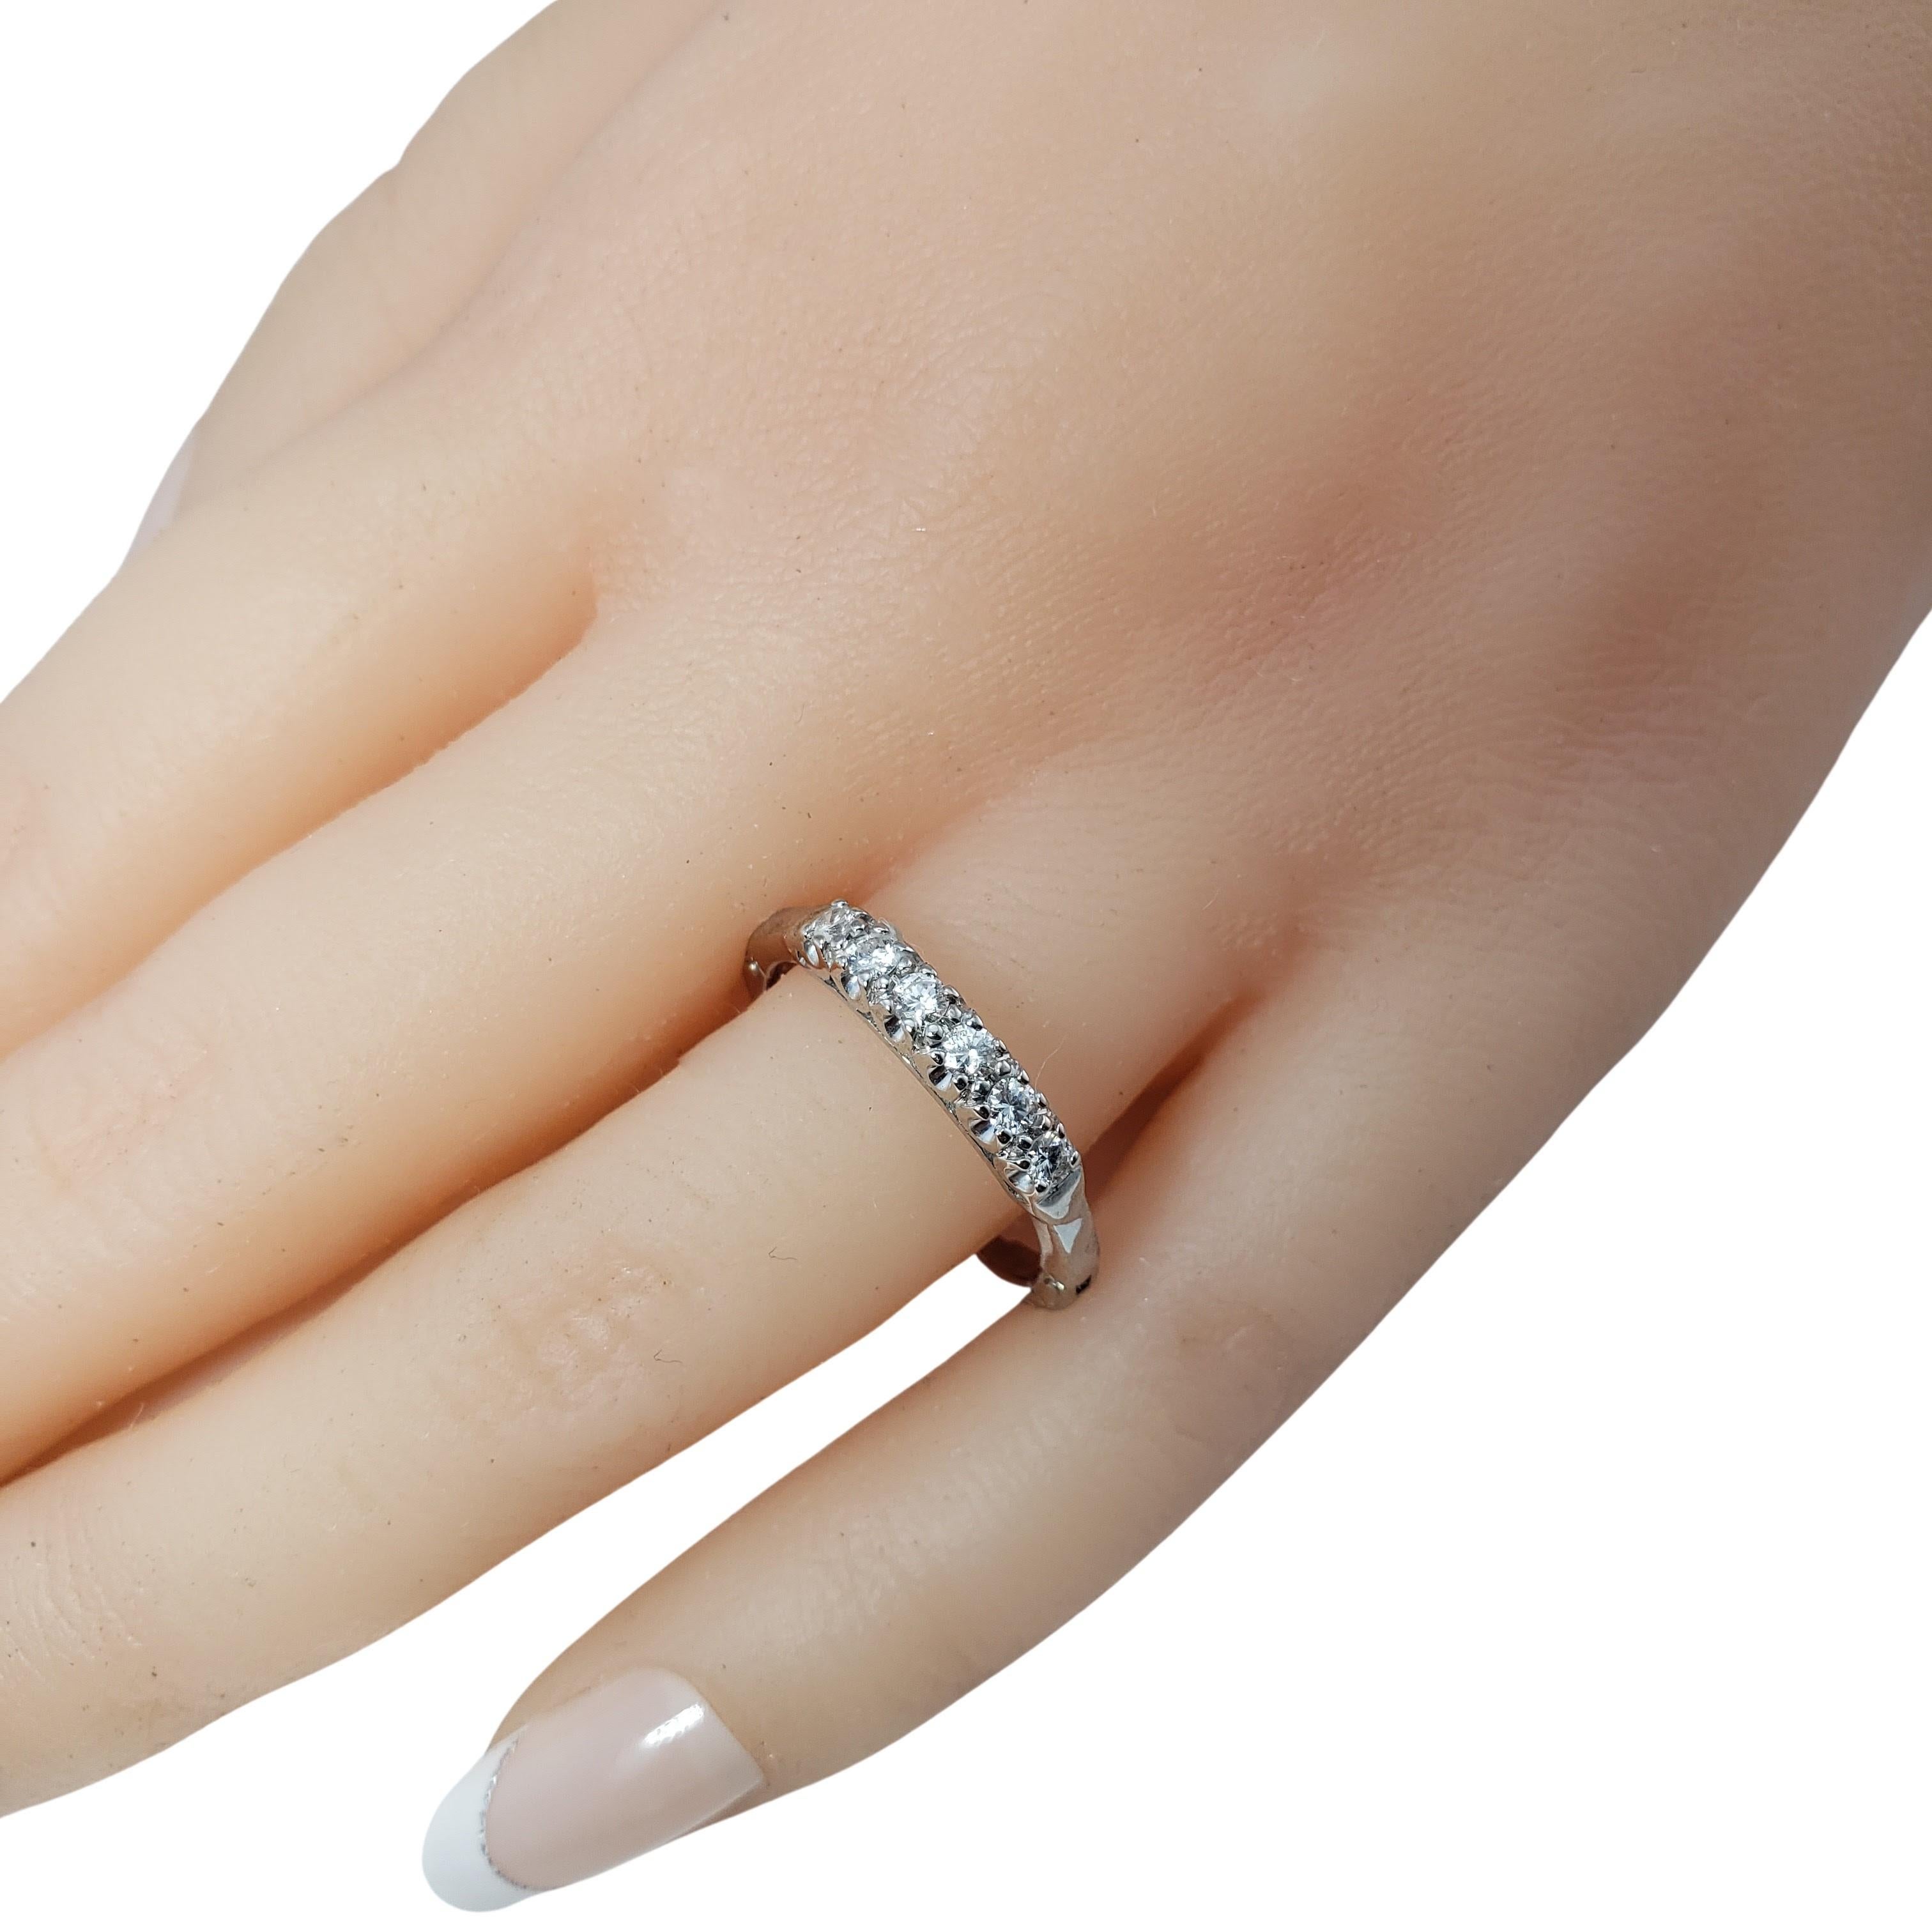 Vintage 10 Karat White Gold Adjustable Comfort Fit Diamond Wedding Band Ring Size 6.25-7-

This sparkling adjustable comfort fit band features six round brilliant cut diamonds set in classic 10K white gold.
Width: 3 mm. Shank: 2 mm.

Approximate